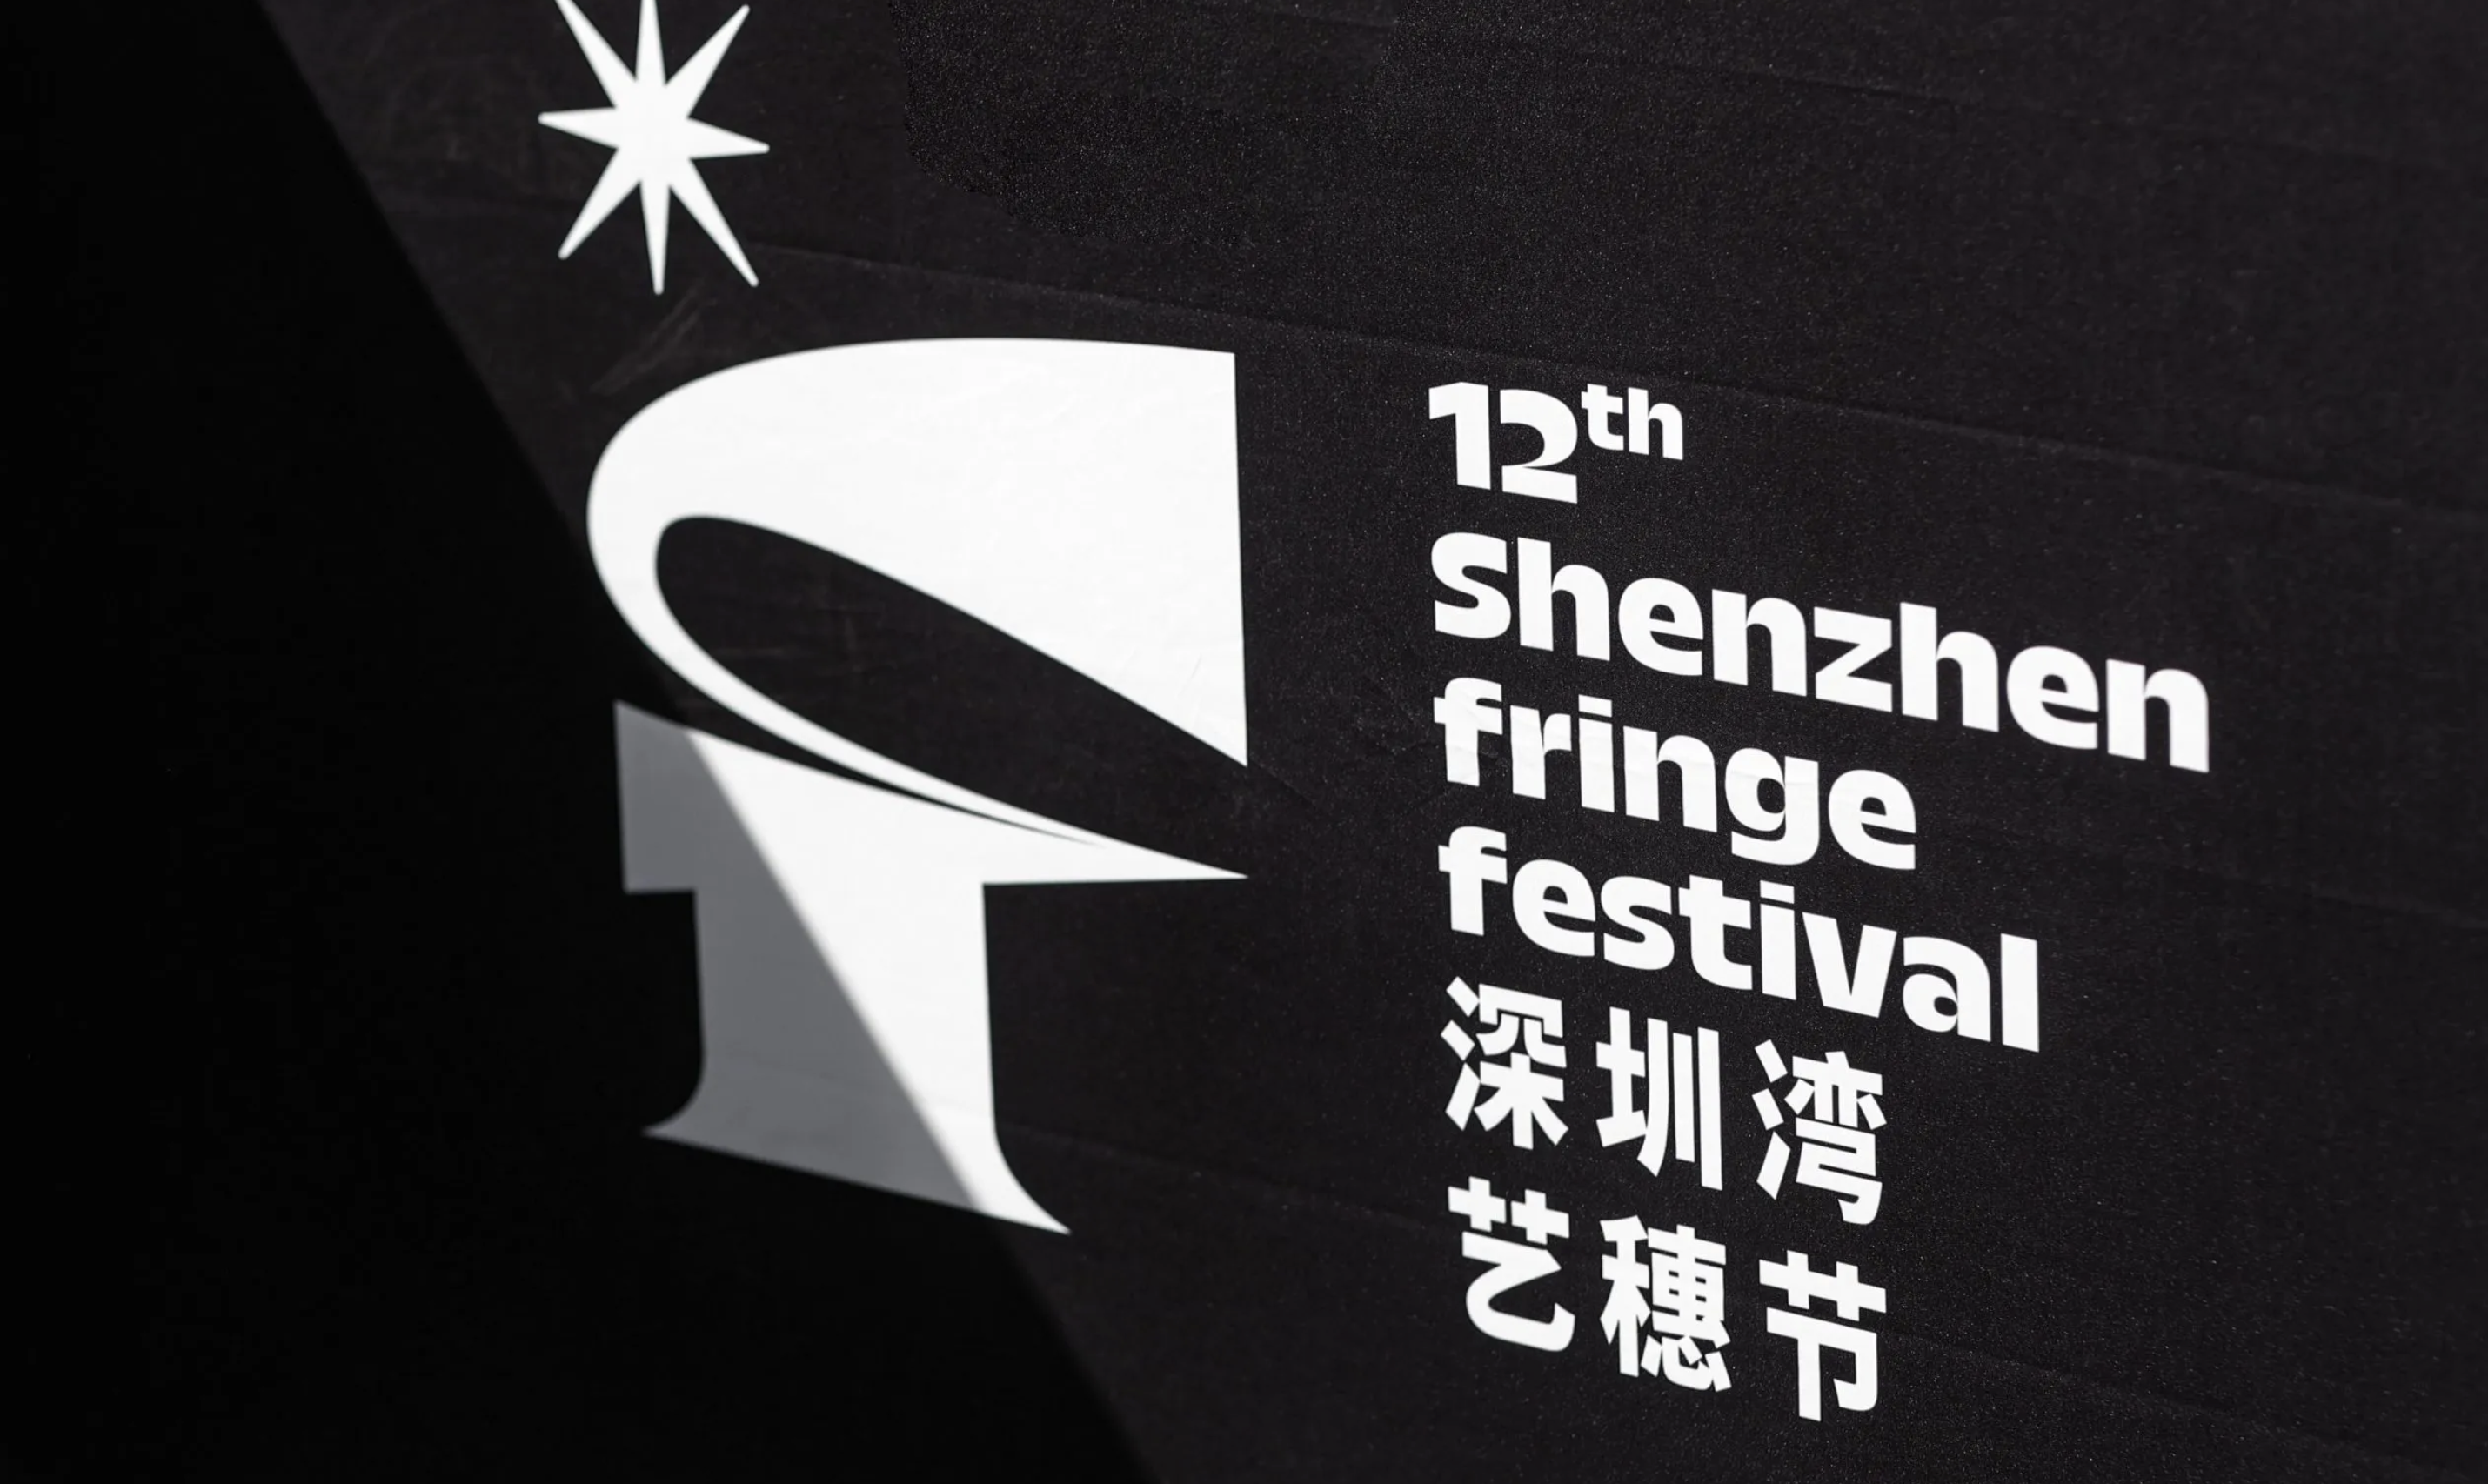 In use for Shenzen Fringe Festival identity by Untitled Macao.